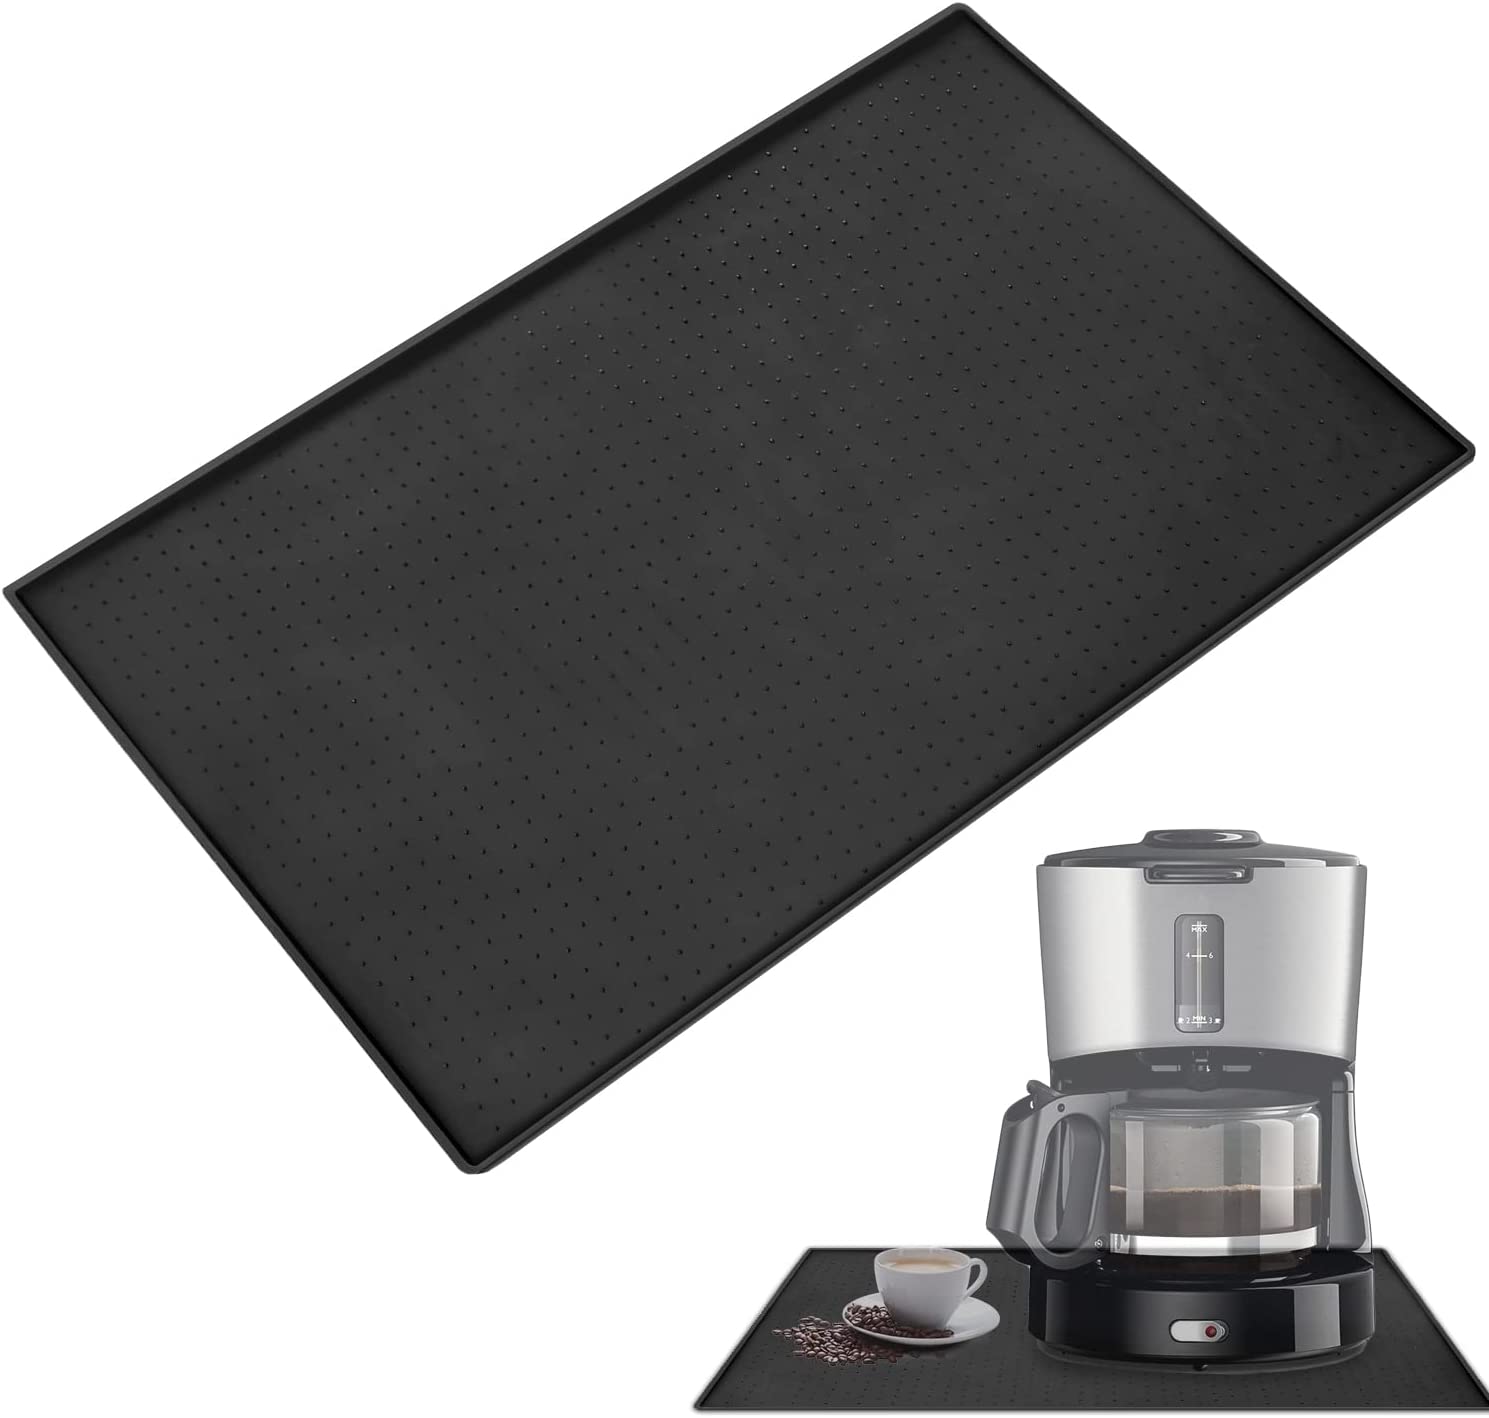 GUJIN Silicone Mat Under Coffee Machine, Non-Slip Mat for Fully Automatic Coffee Machine, Barista Accessories with Granules Design for Stabilising the Coffee Machine and Protecting the Table Top (Black)